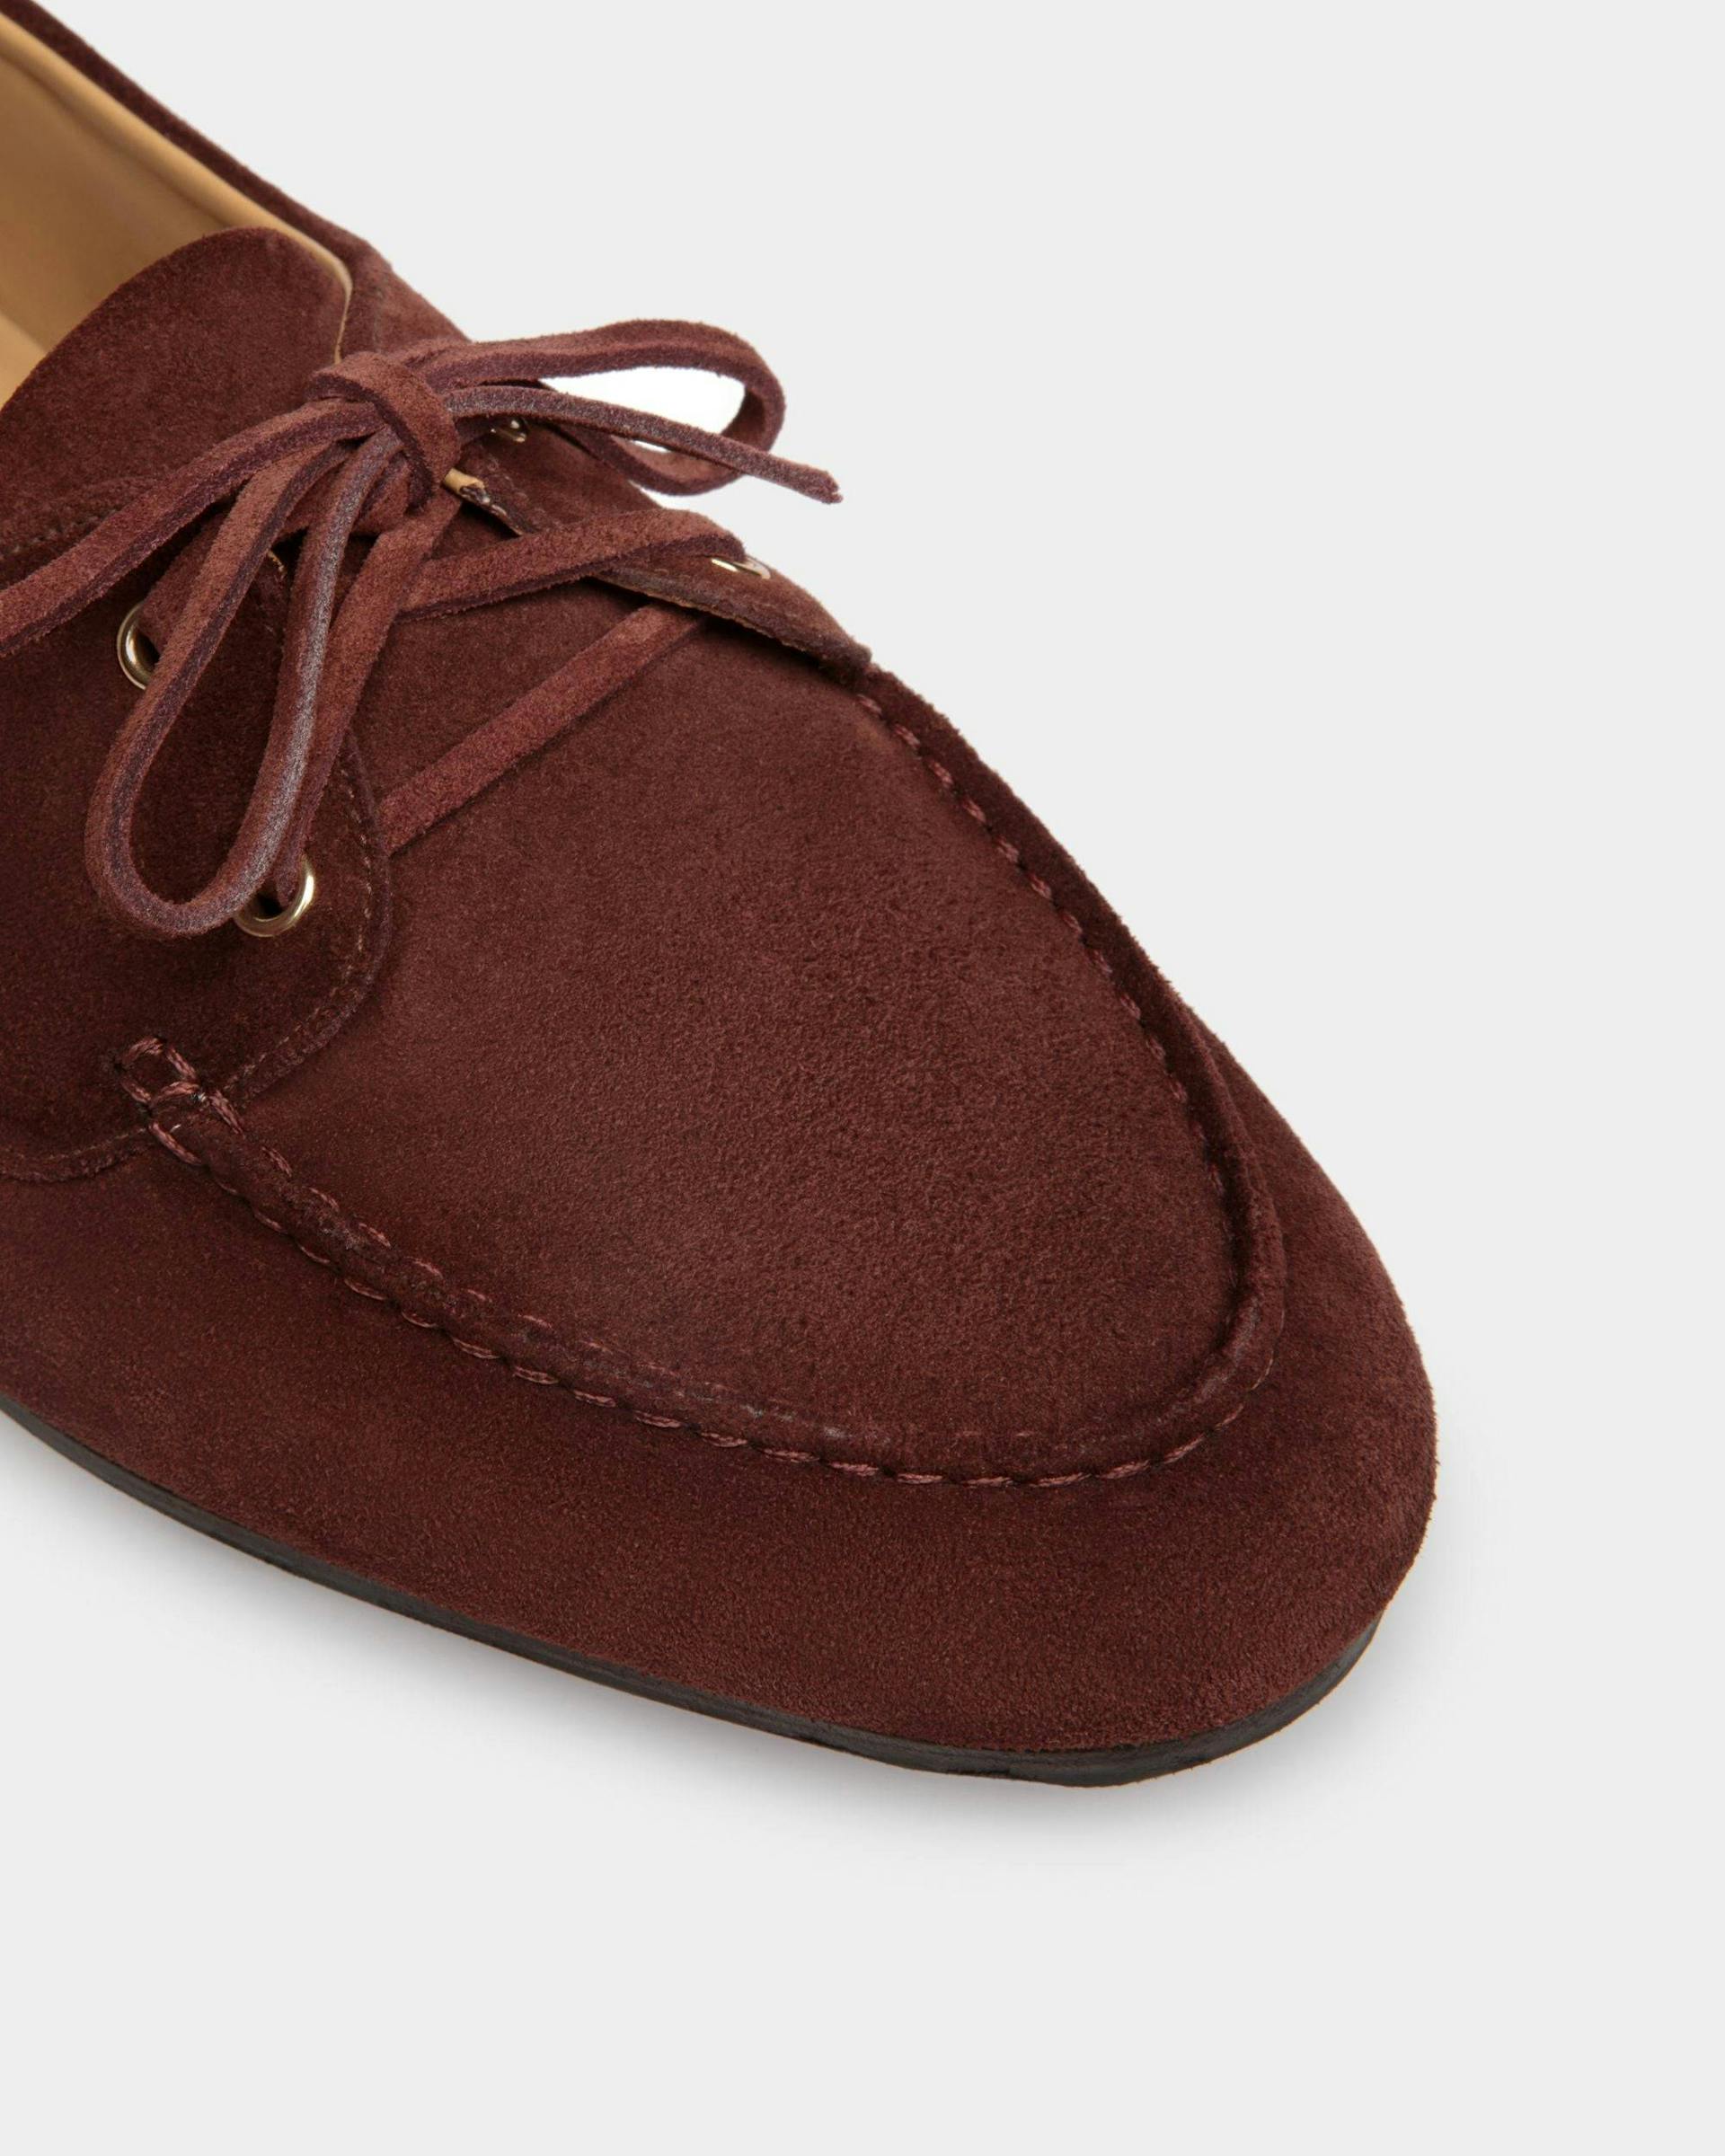 Men's Plume Moccasin in Chestnut Brown Suede | Bally | Still Life Detail